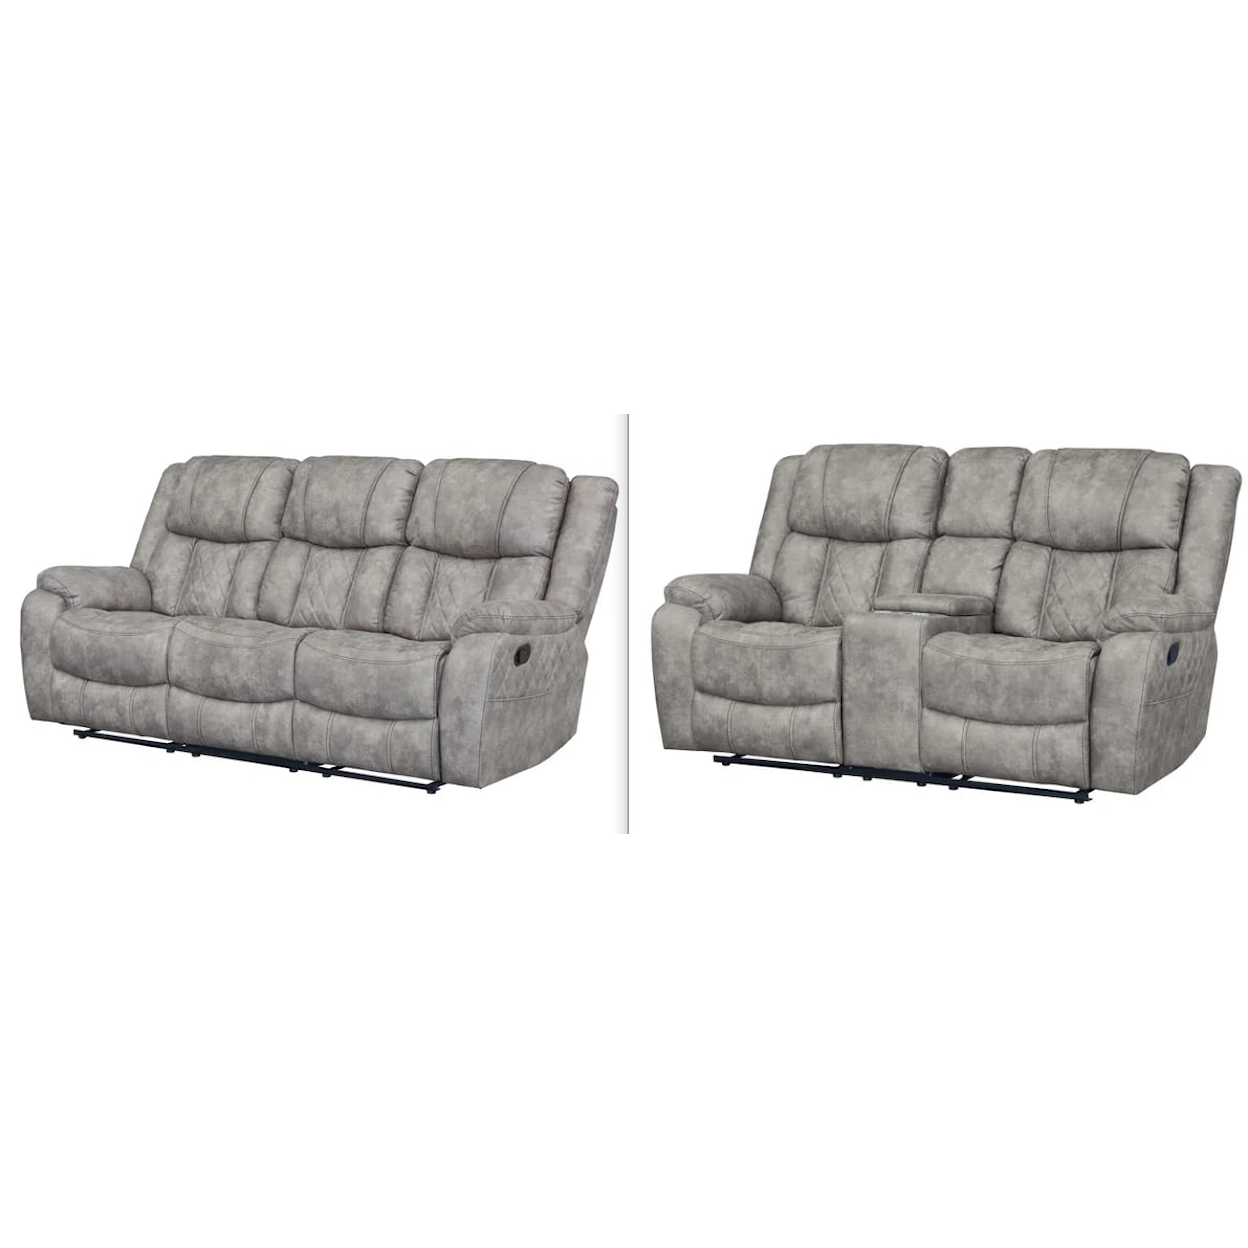 Standard Furniture Luxor Pewter LUXOR PEWTER RECLINING LOVESEAT | W/ CONSOLE